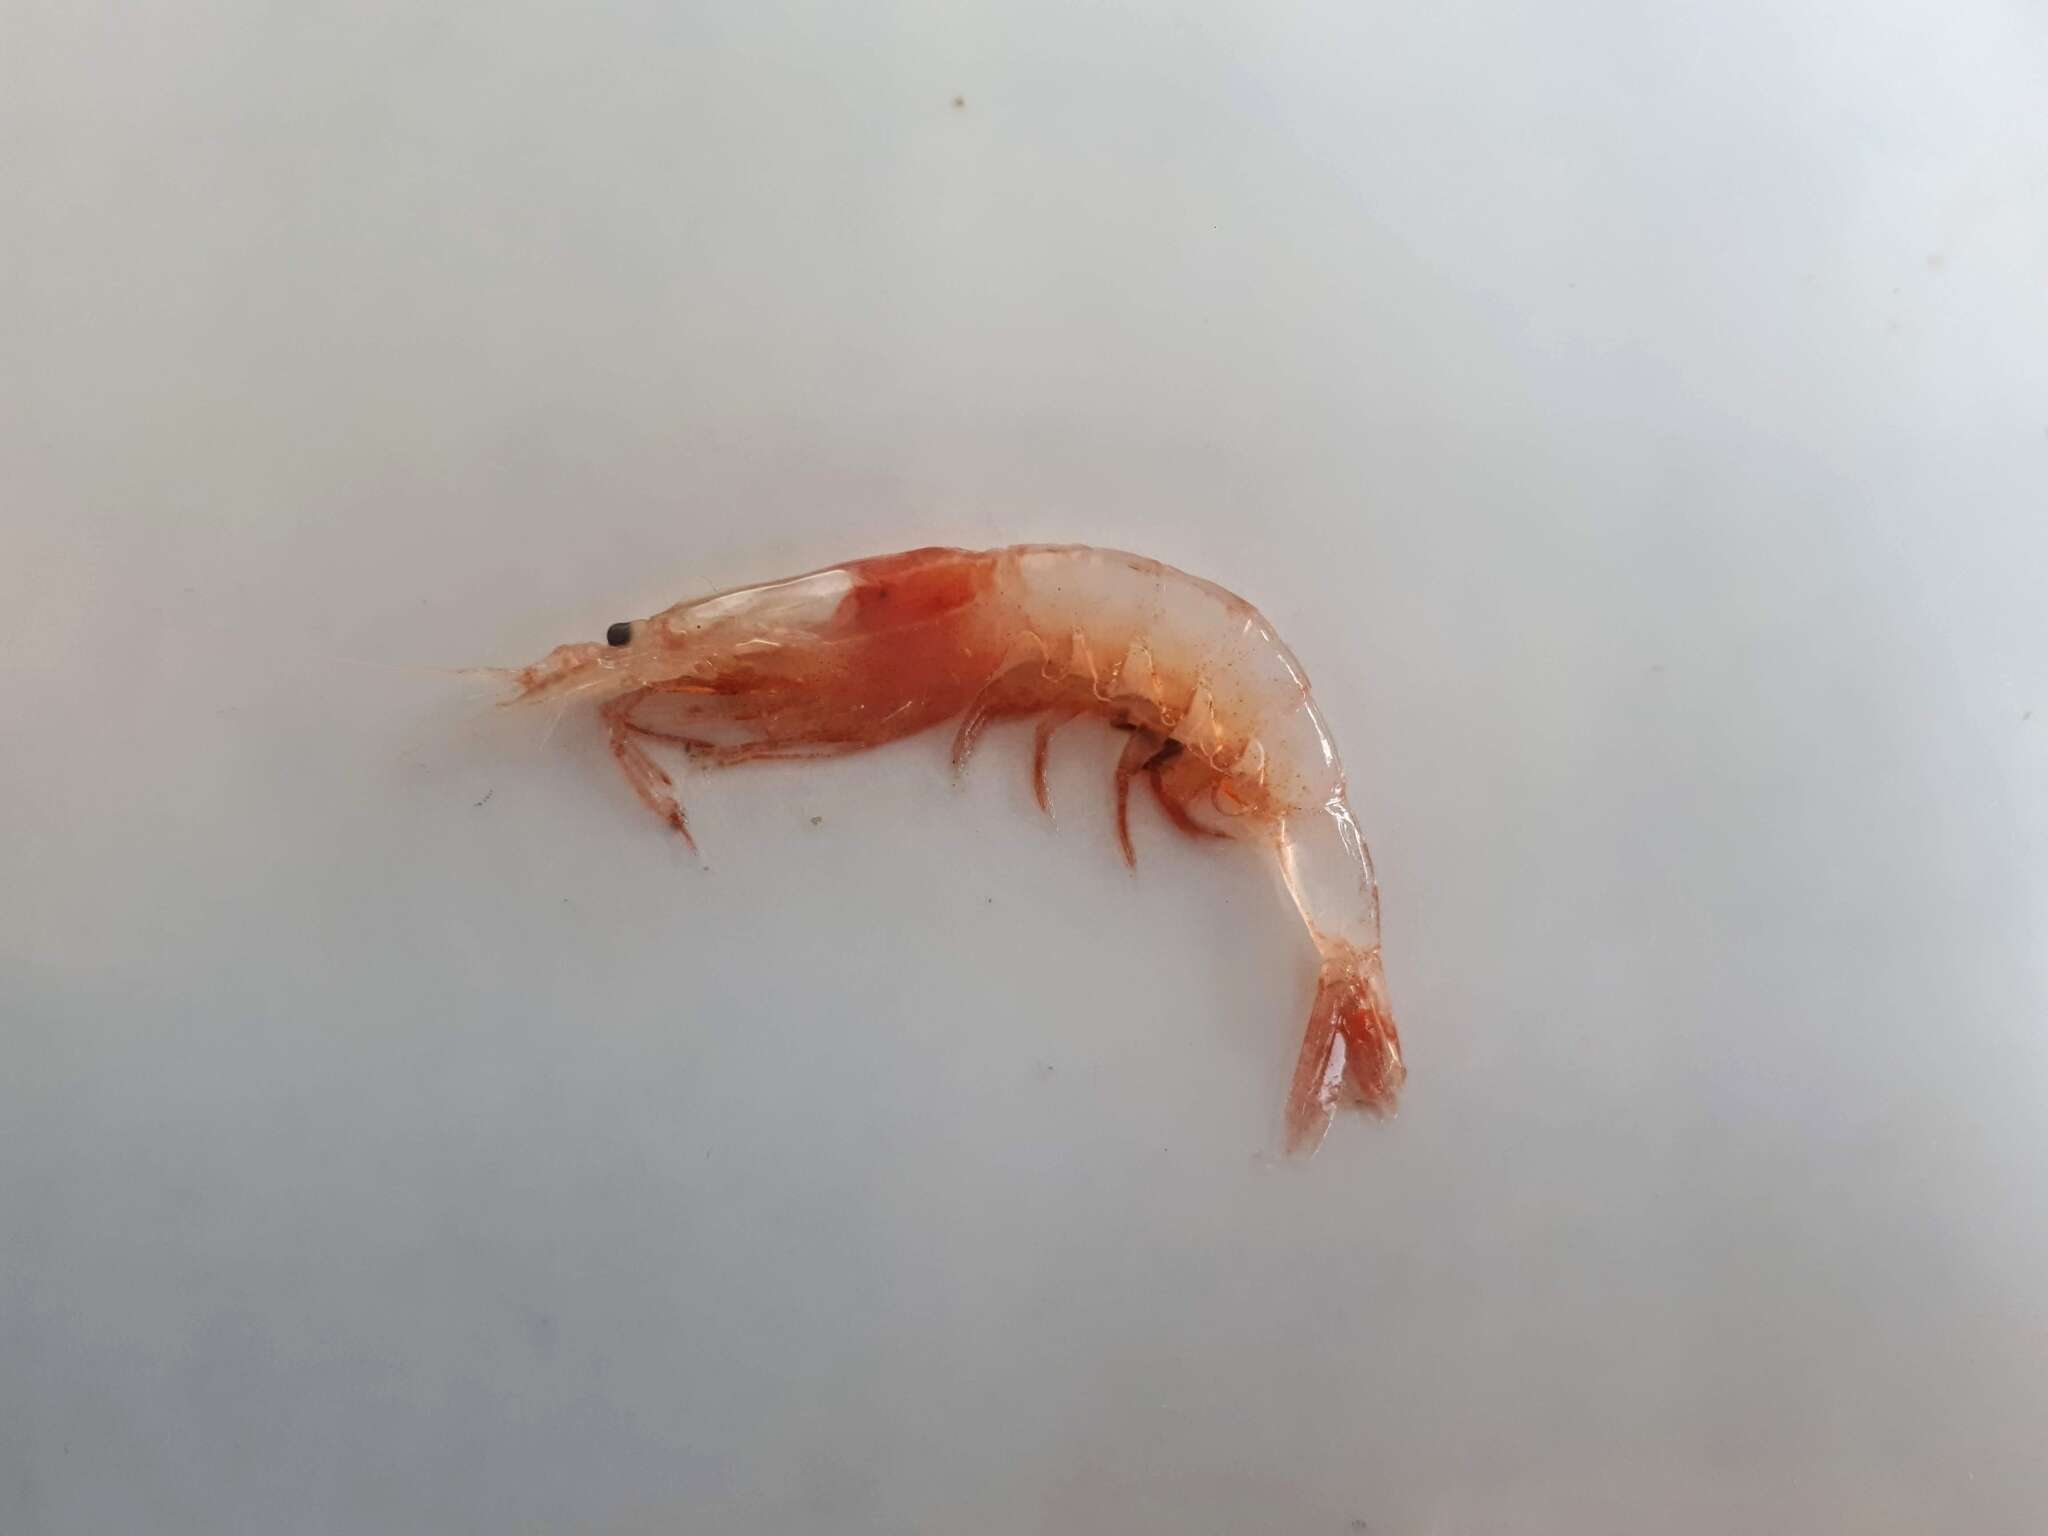 Image of Pacific glass shrimp